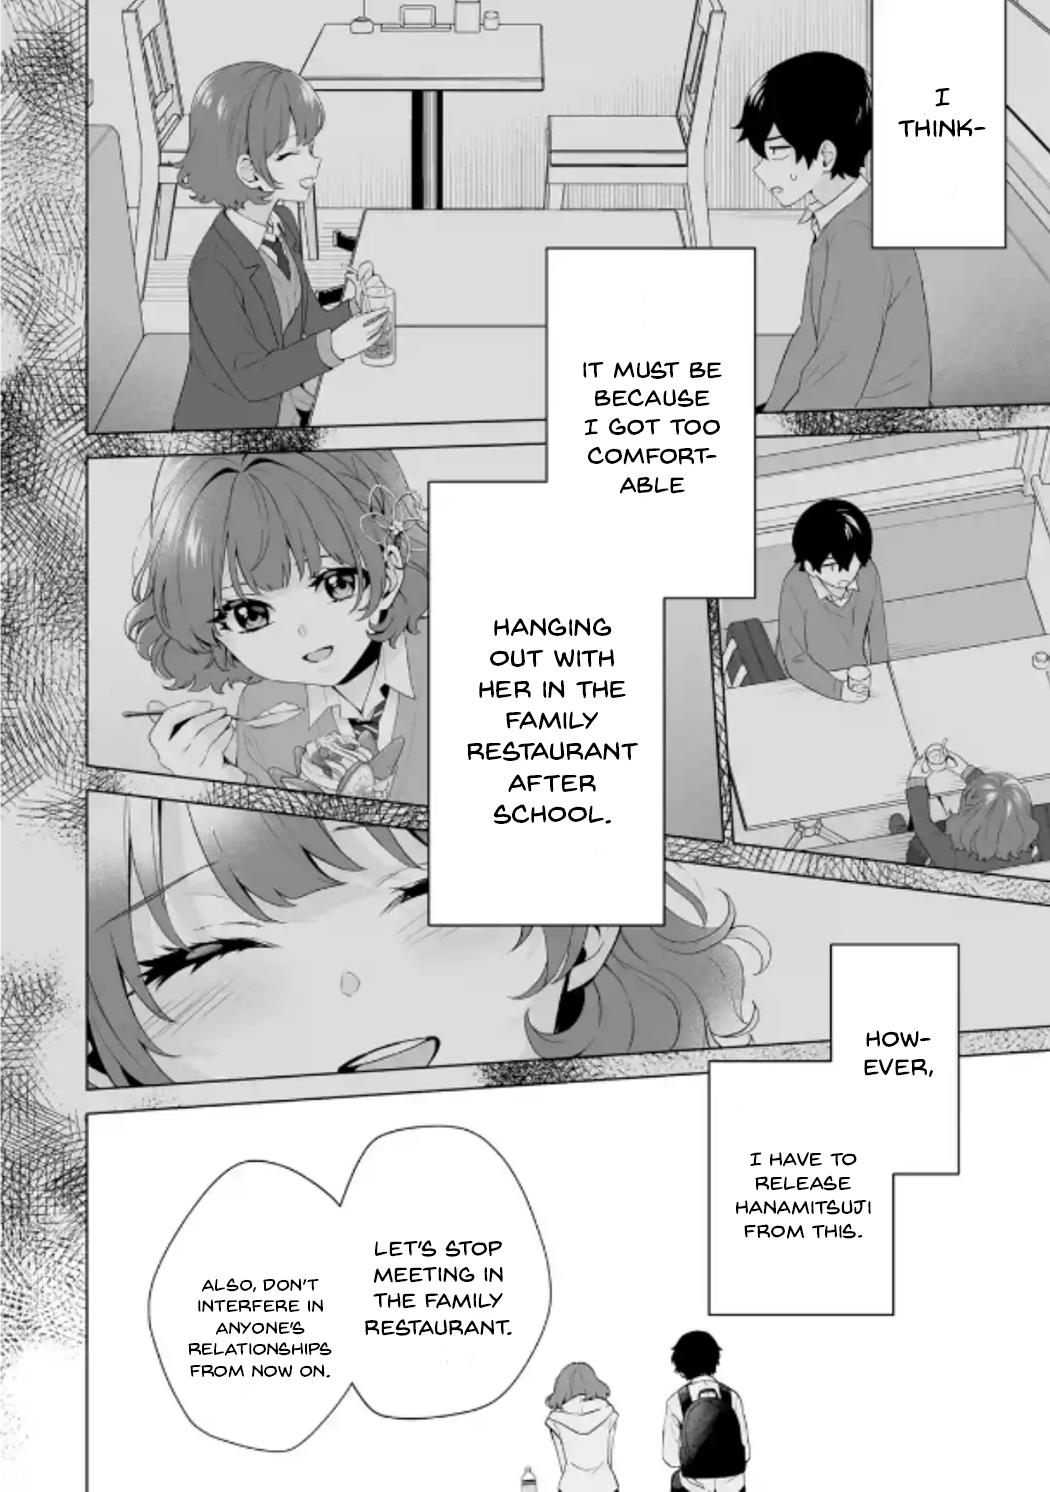 Please Leave Me Alone (For Some Reason, She Wants To Change A Lone Wolf's Helpless High School Life.) Chapter 15